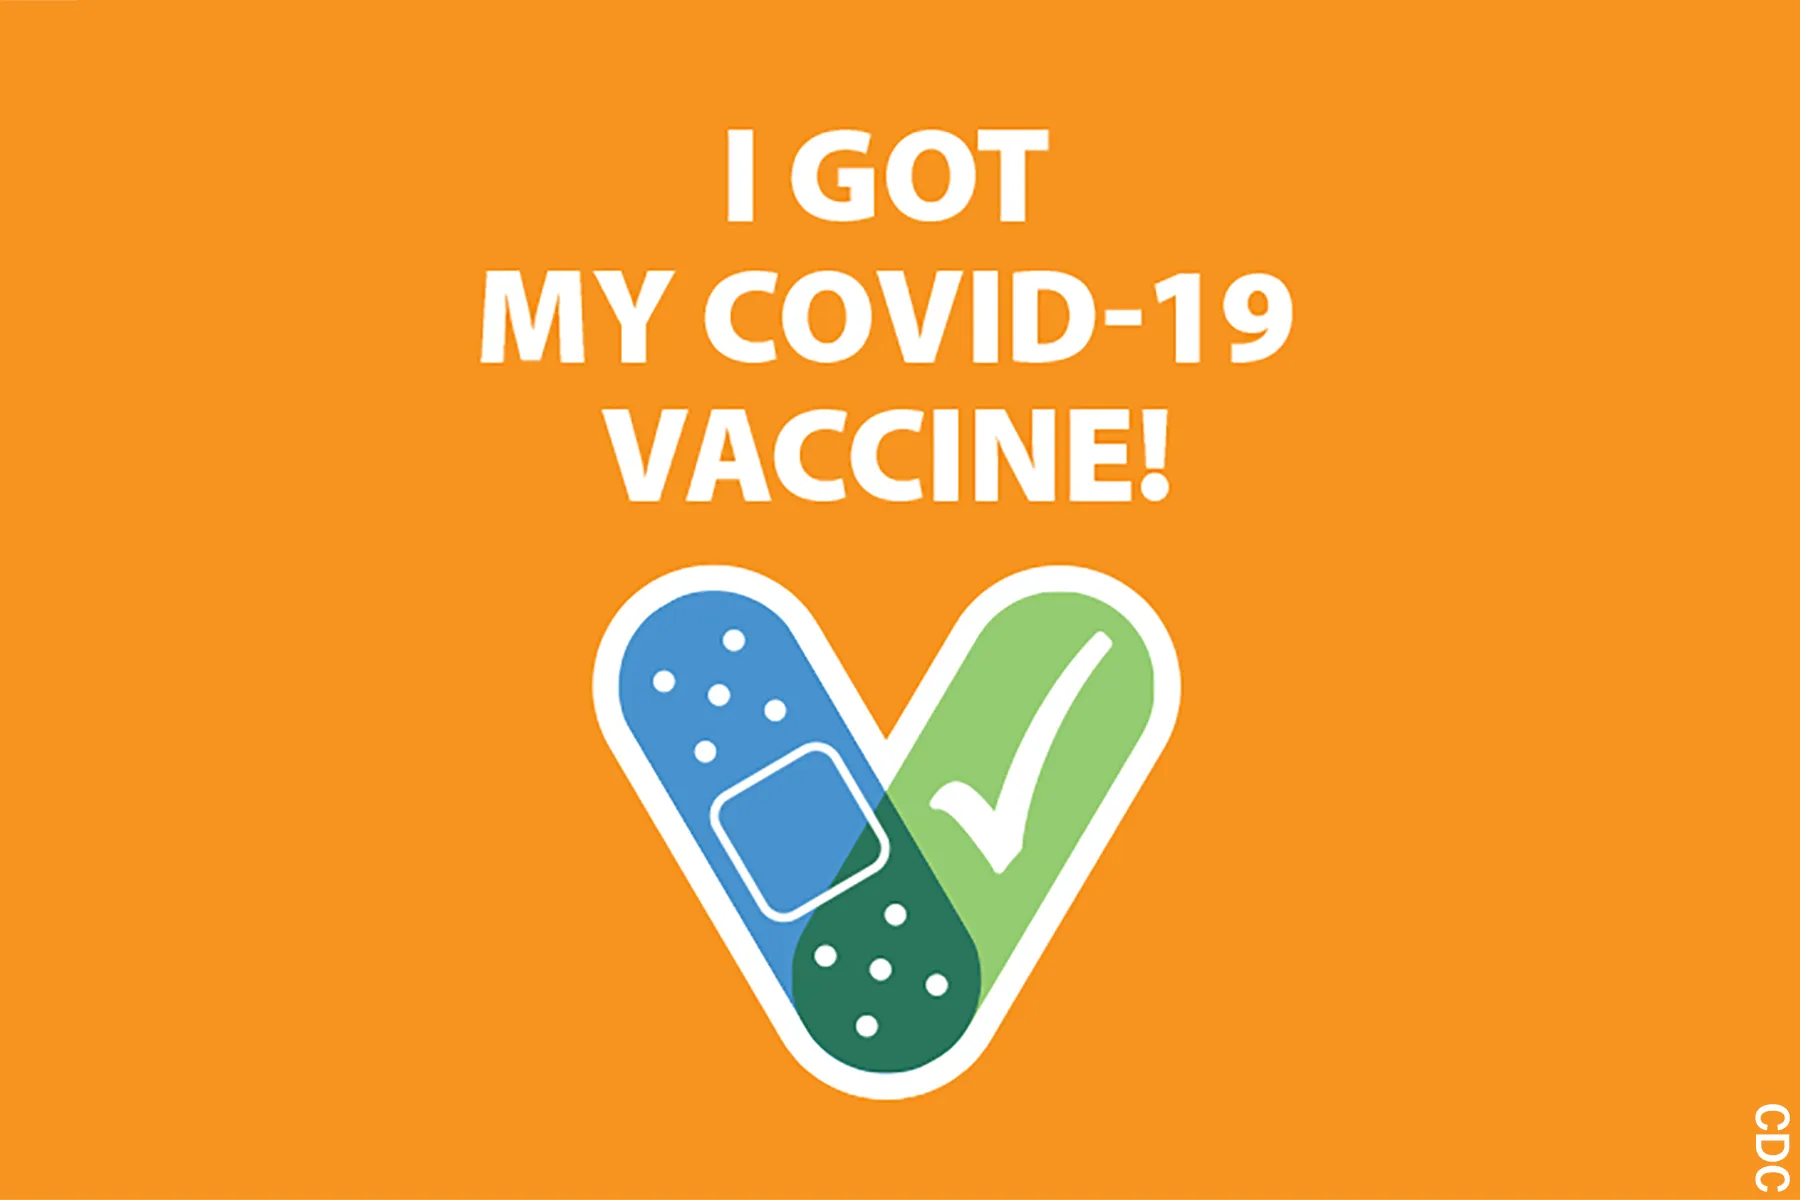 CDC Encourages COVID Vaccine With Stickers, Buttons